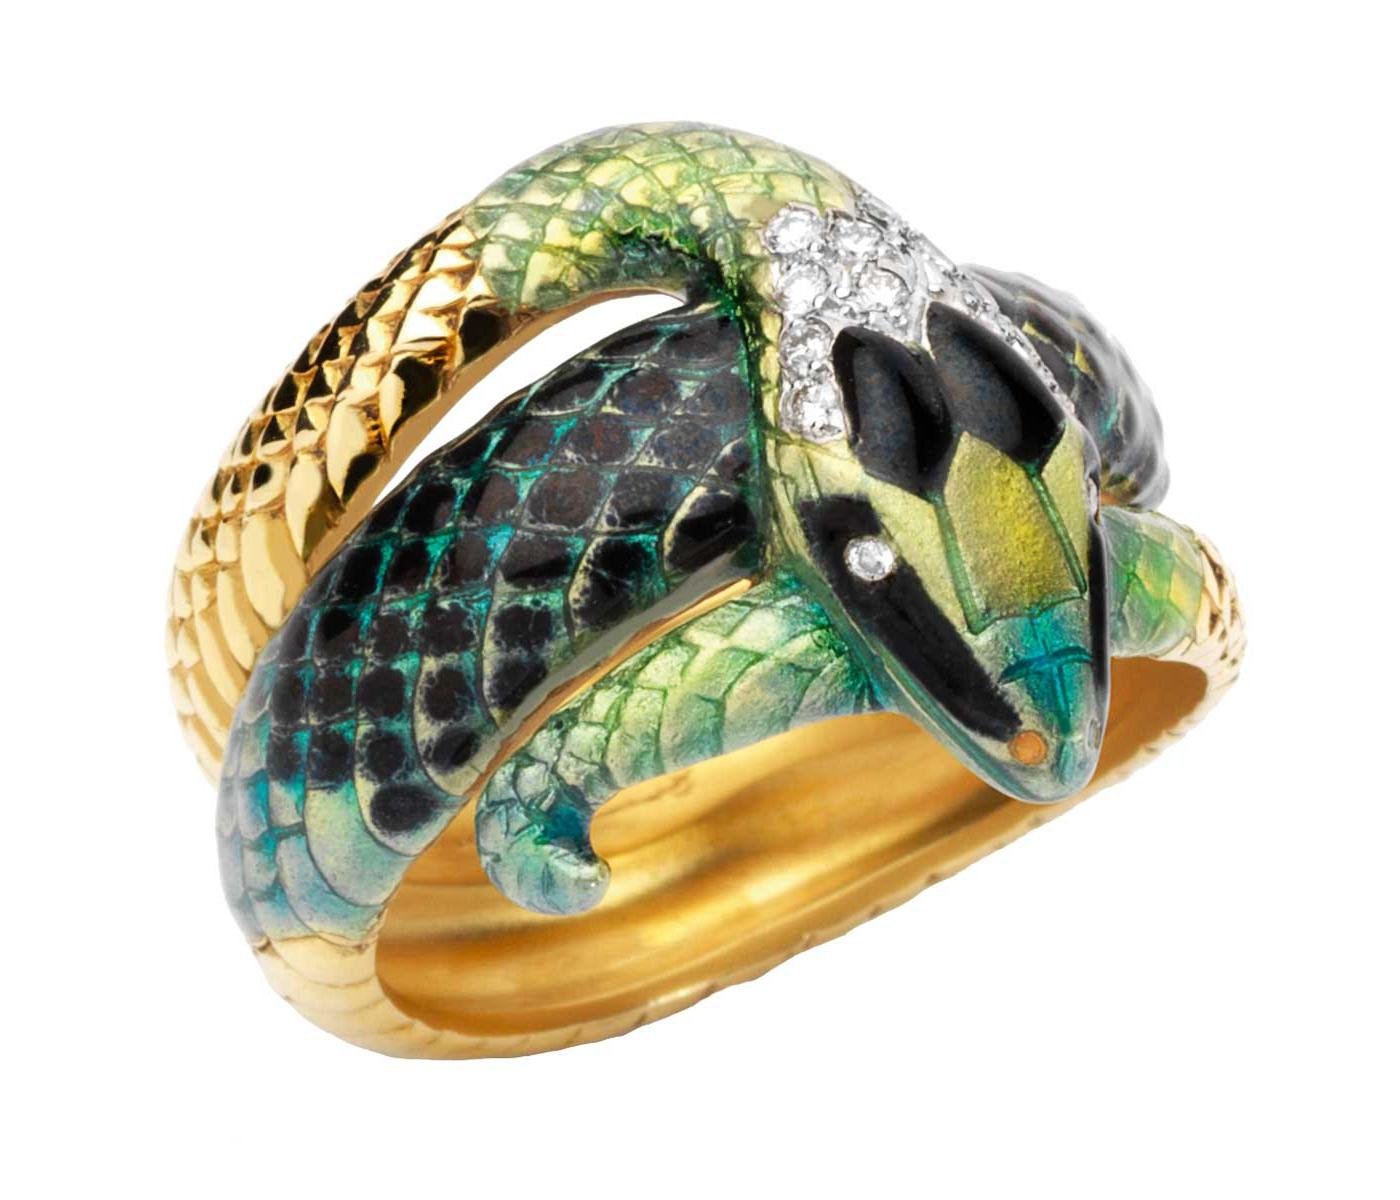 Ring by Masriera